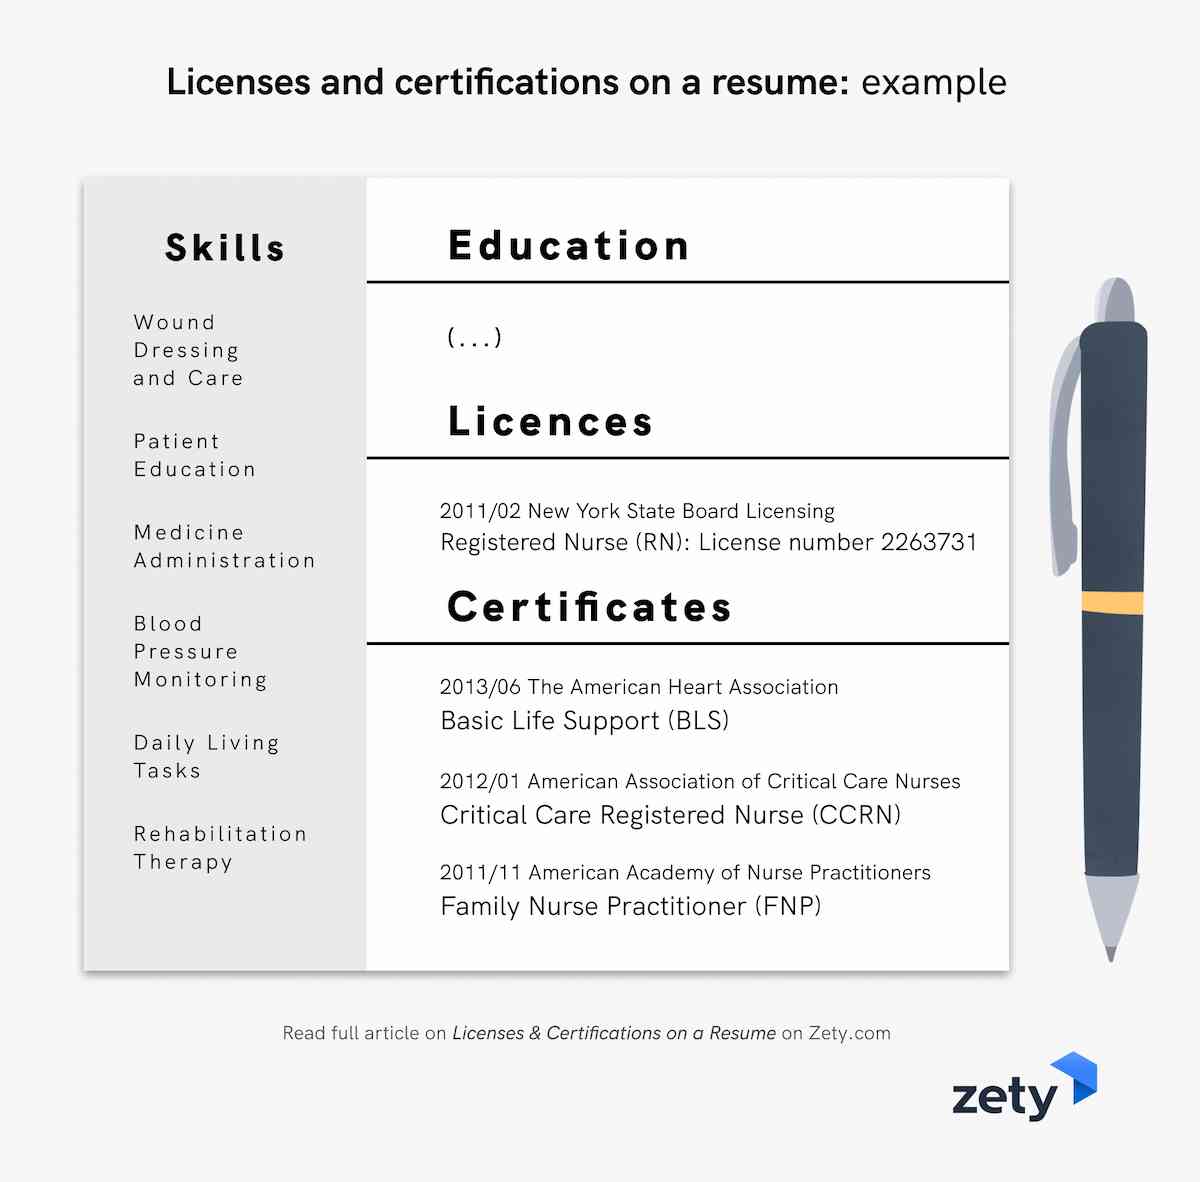 Licenses and certifications on a resume example